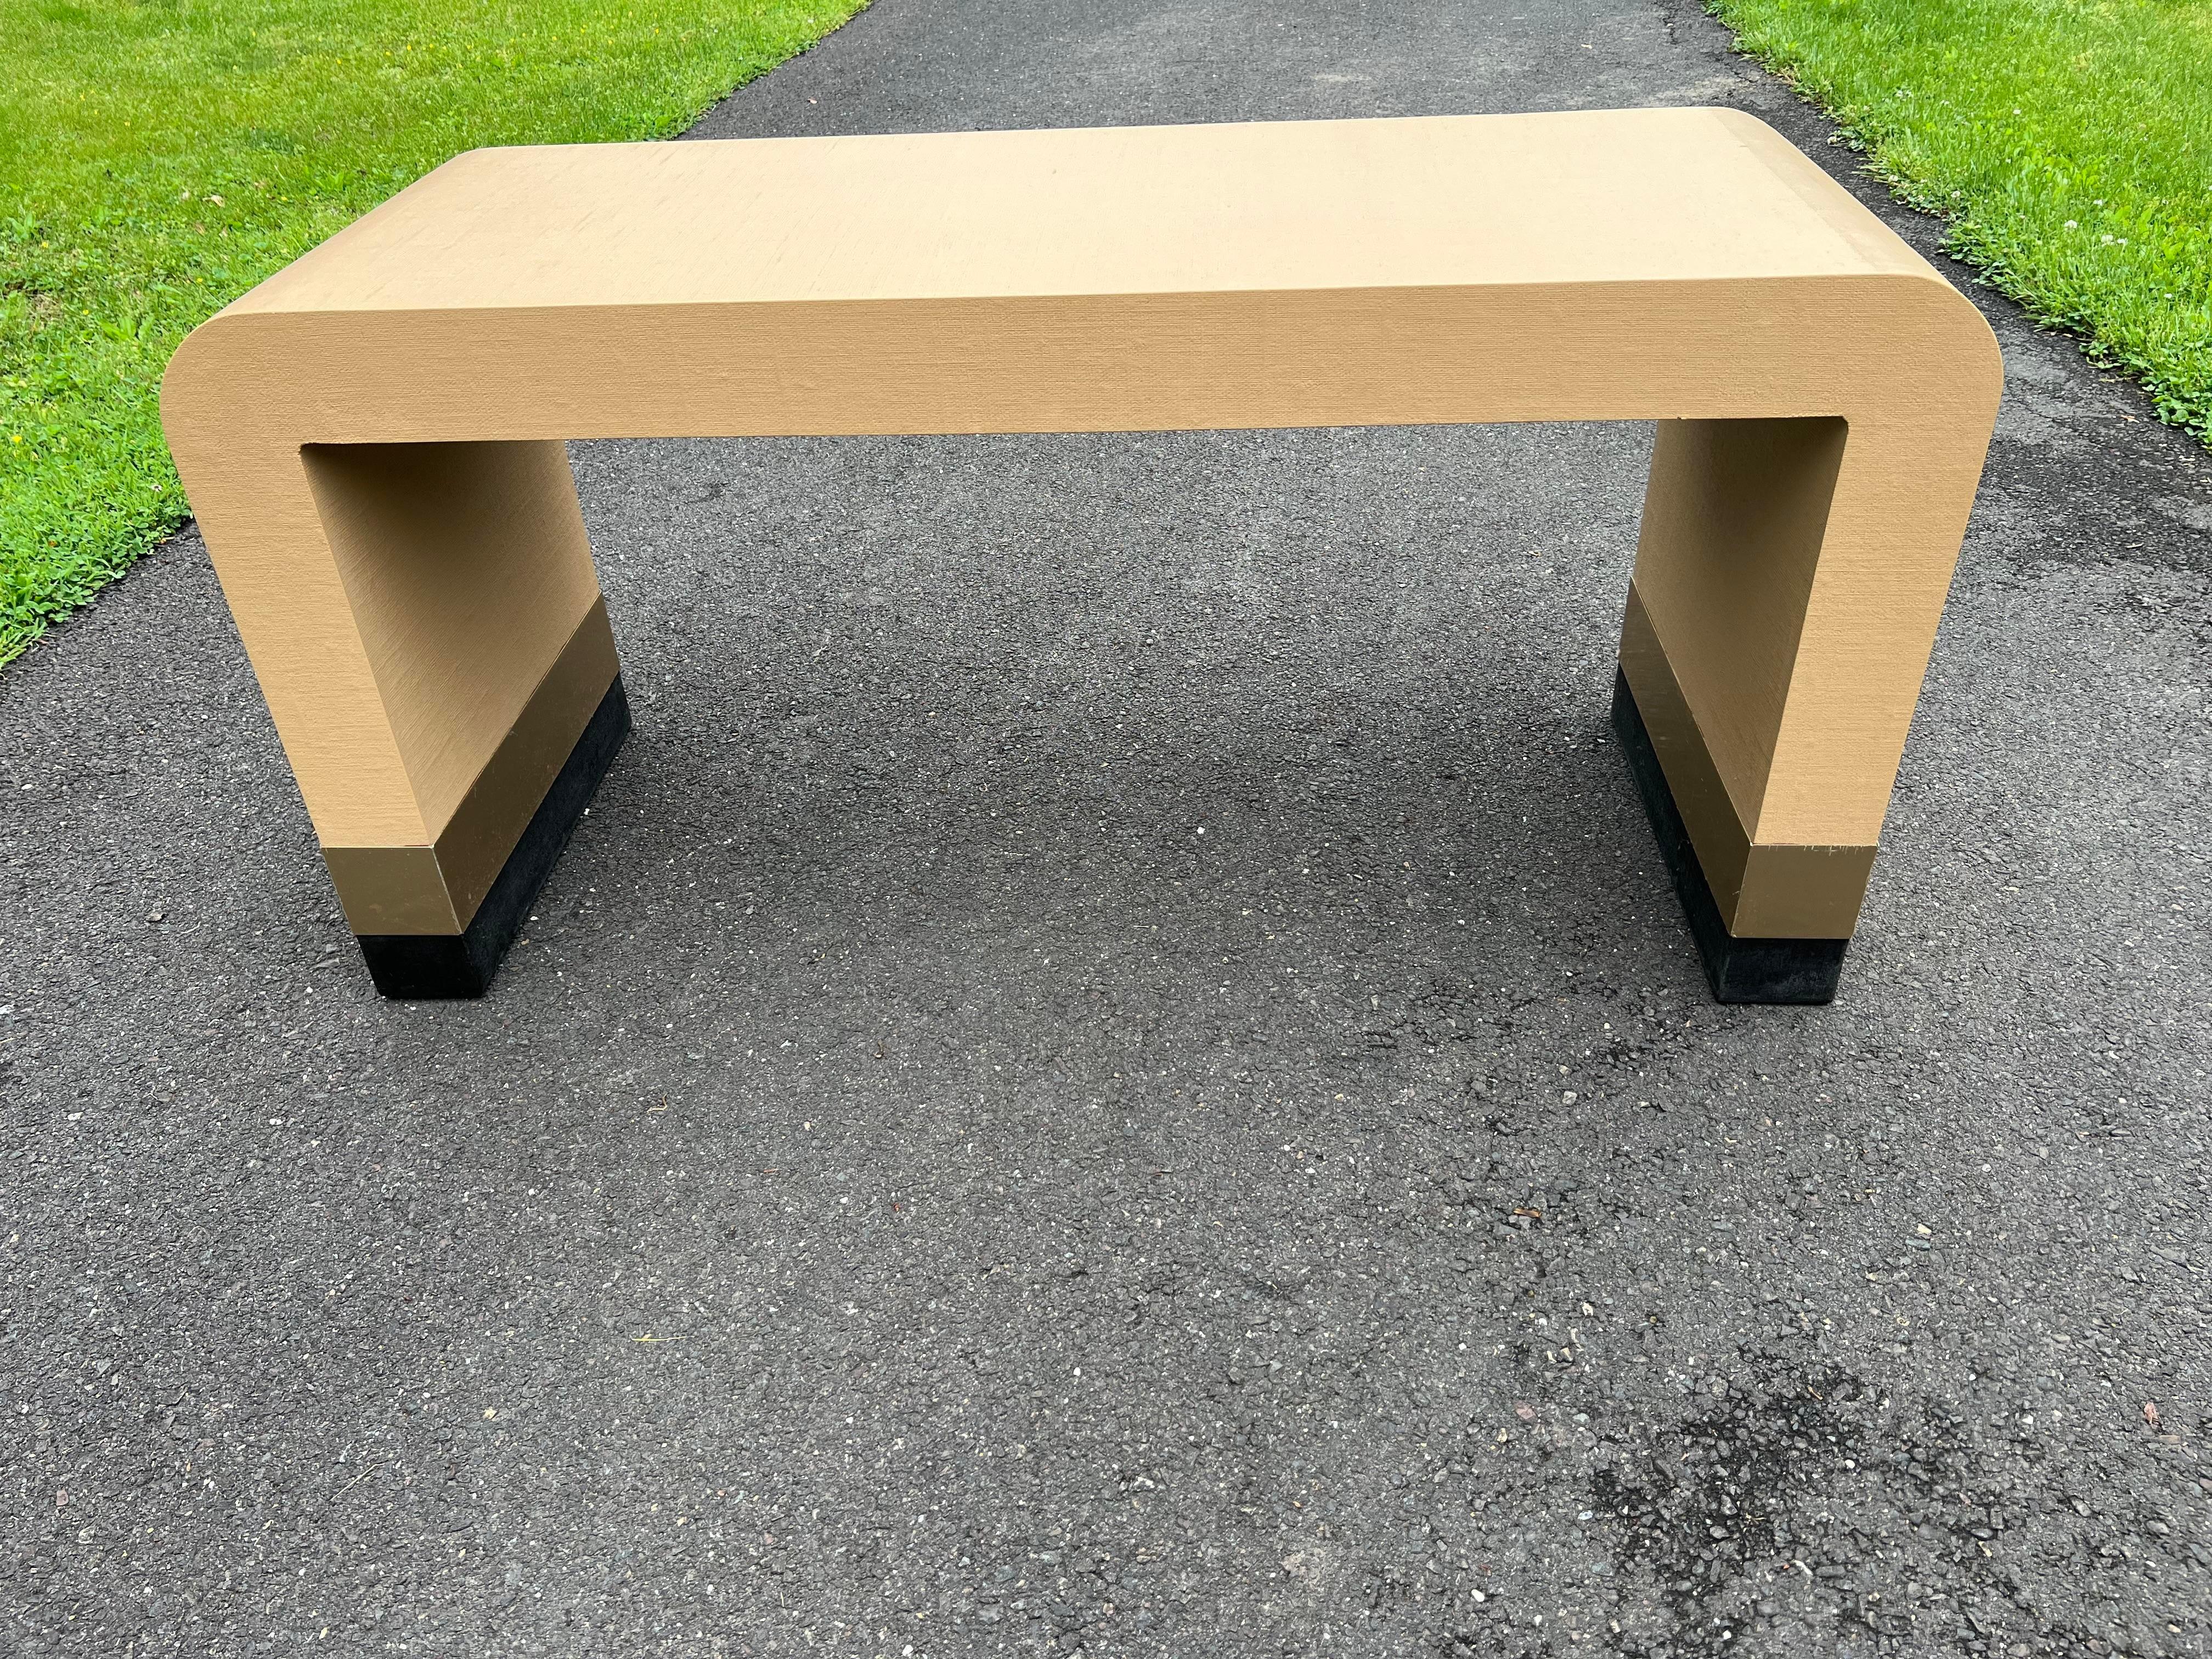 Custom made waterfall console table with linens like texture. The table was made in 1980s and the color is peach with the brass trims near the foot on both sides.